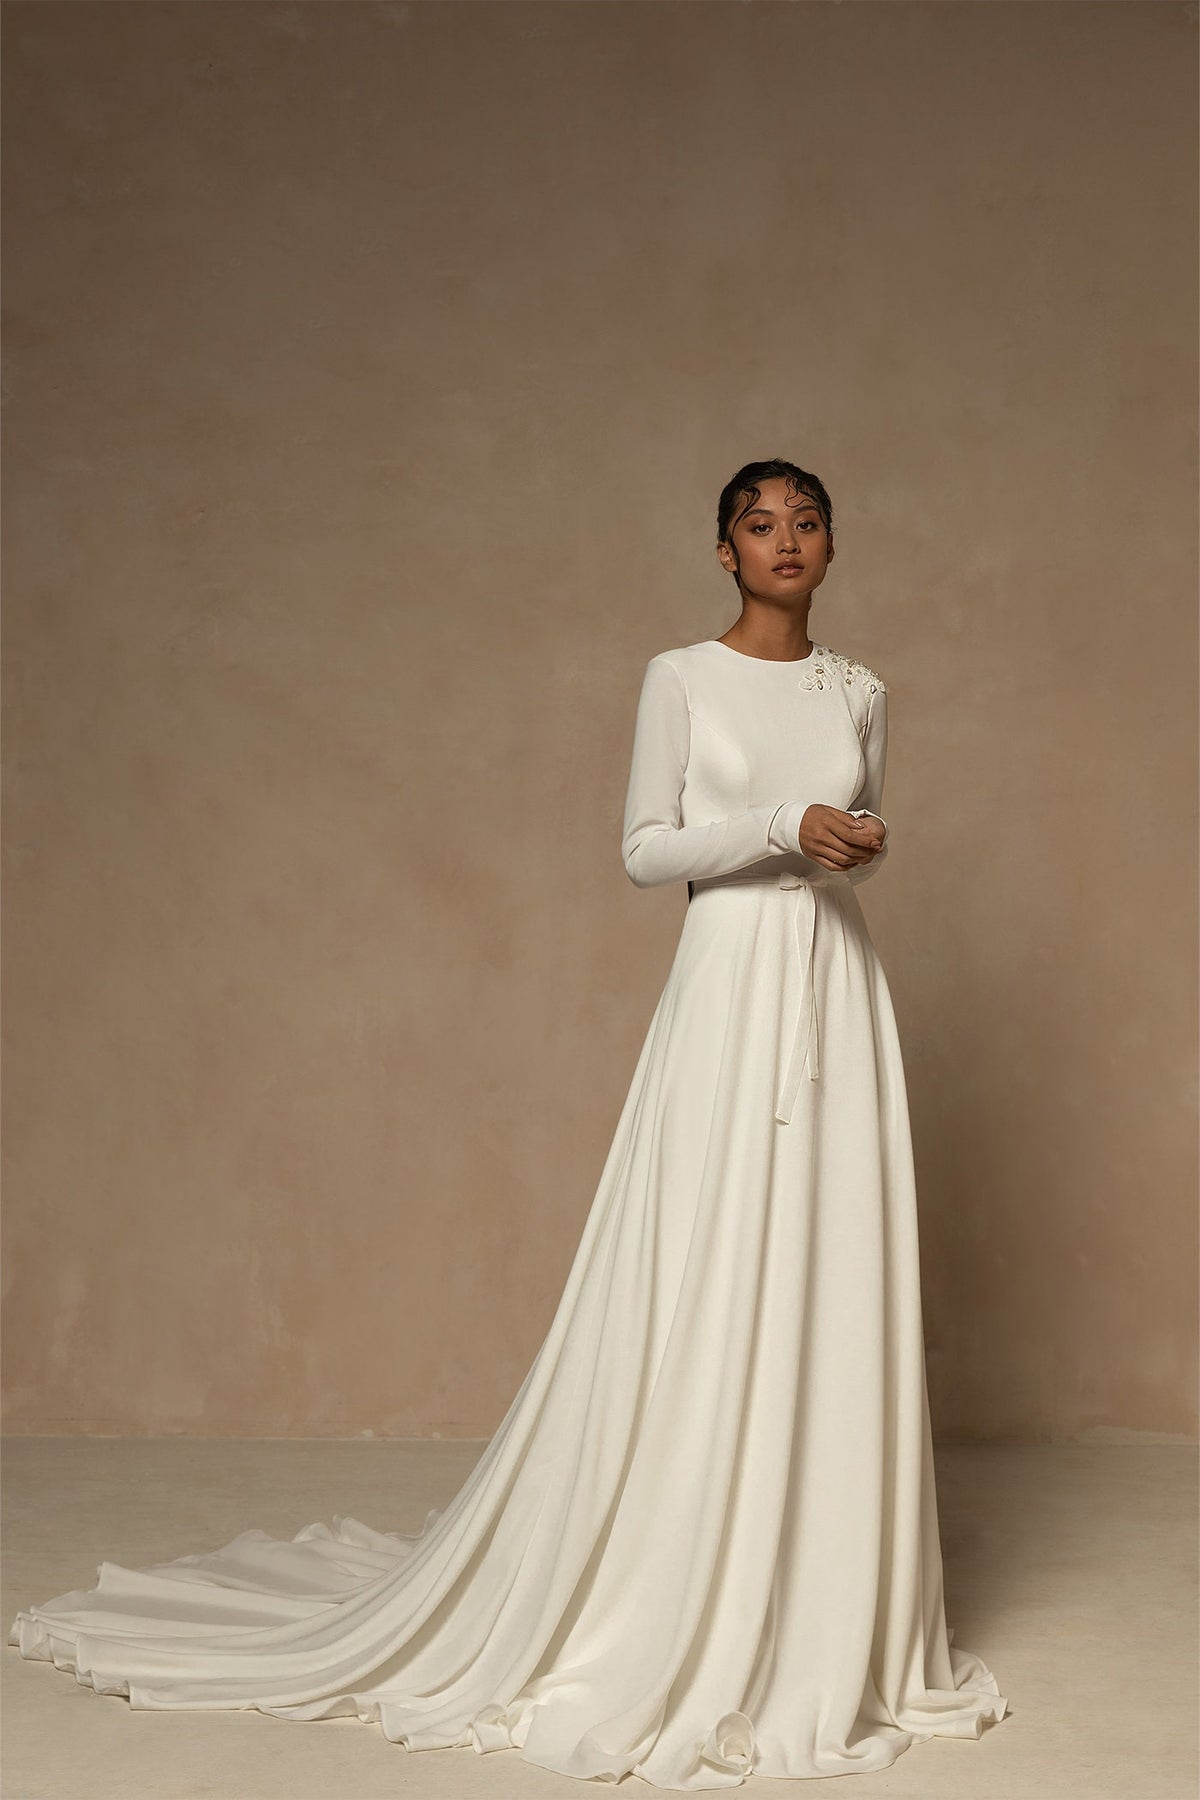 Simple Unique Modest Scoop Neck Long Fitted Sleeve High Neckline Closed Back Wedding Dress Bridal Gown LDS Long Train Zipper Back Minimalist